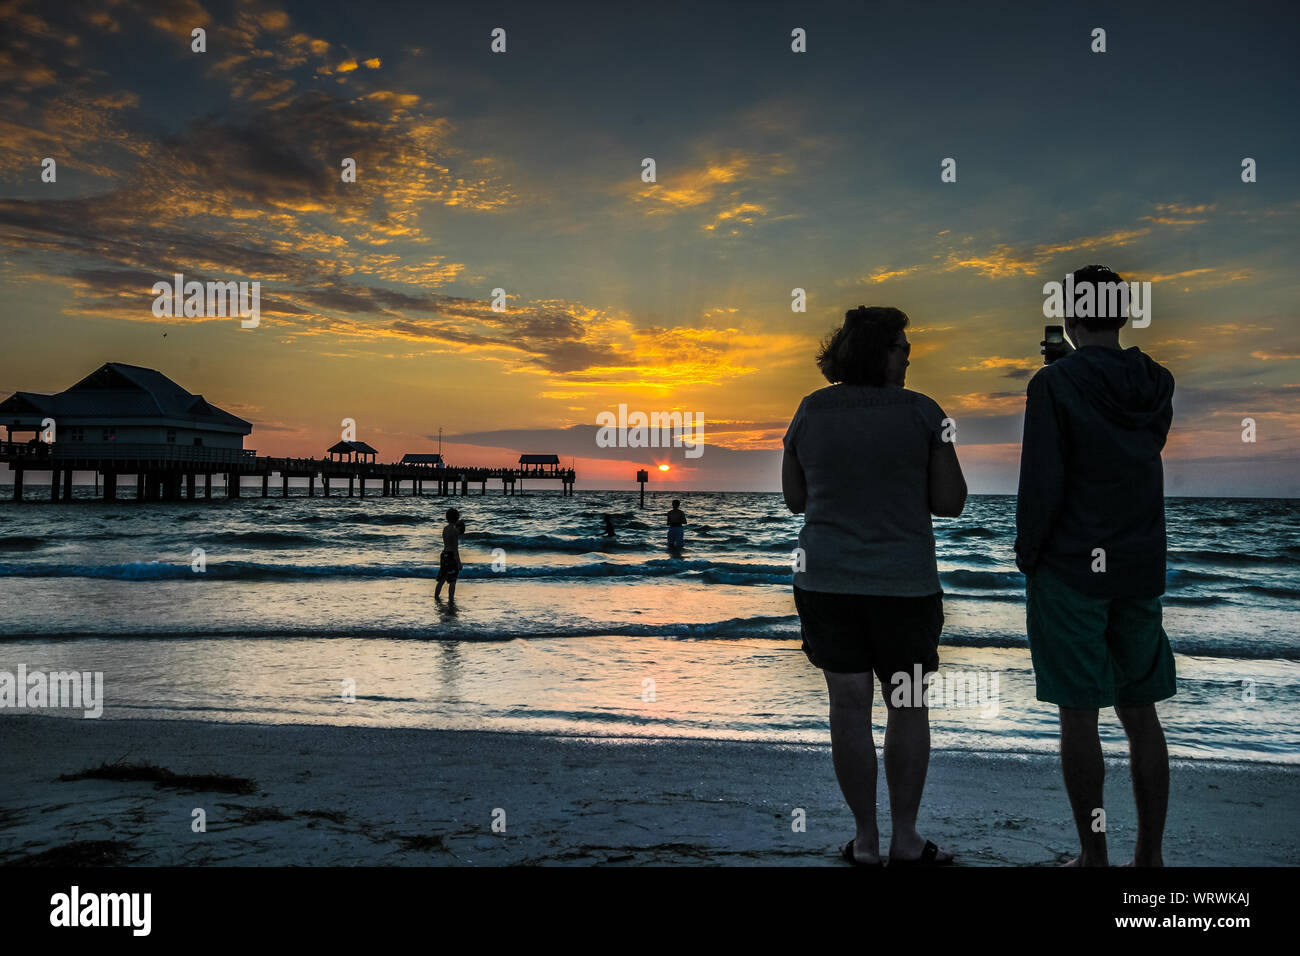 American looking male and female watching sunset on the beach - Senior lifestyle Stock Photo